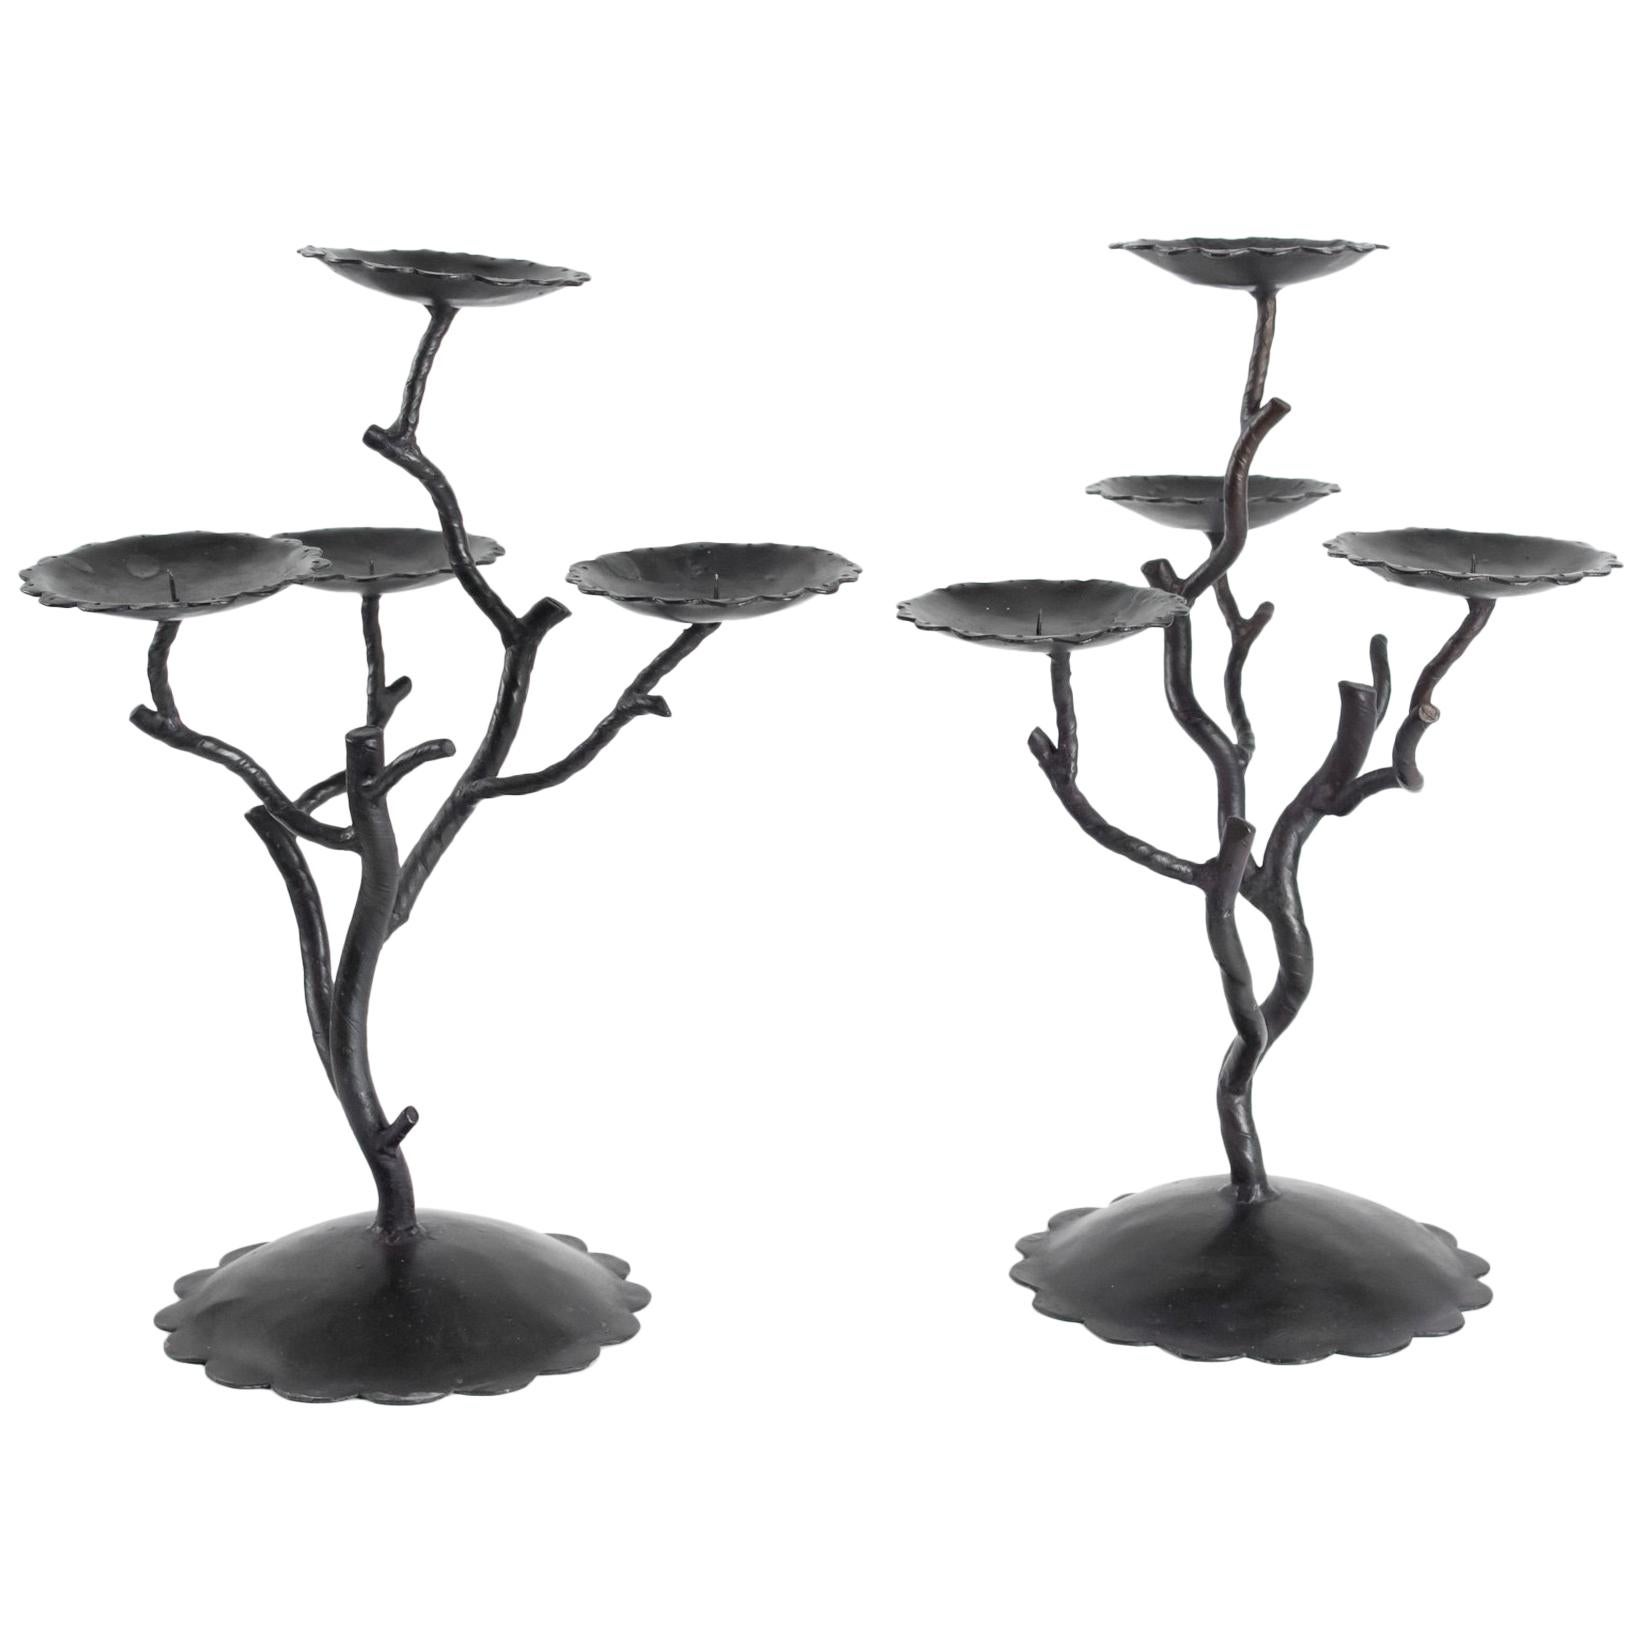 Pair of Candelabra 4 Branches, 20th Century, Modern Art For Sale